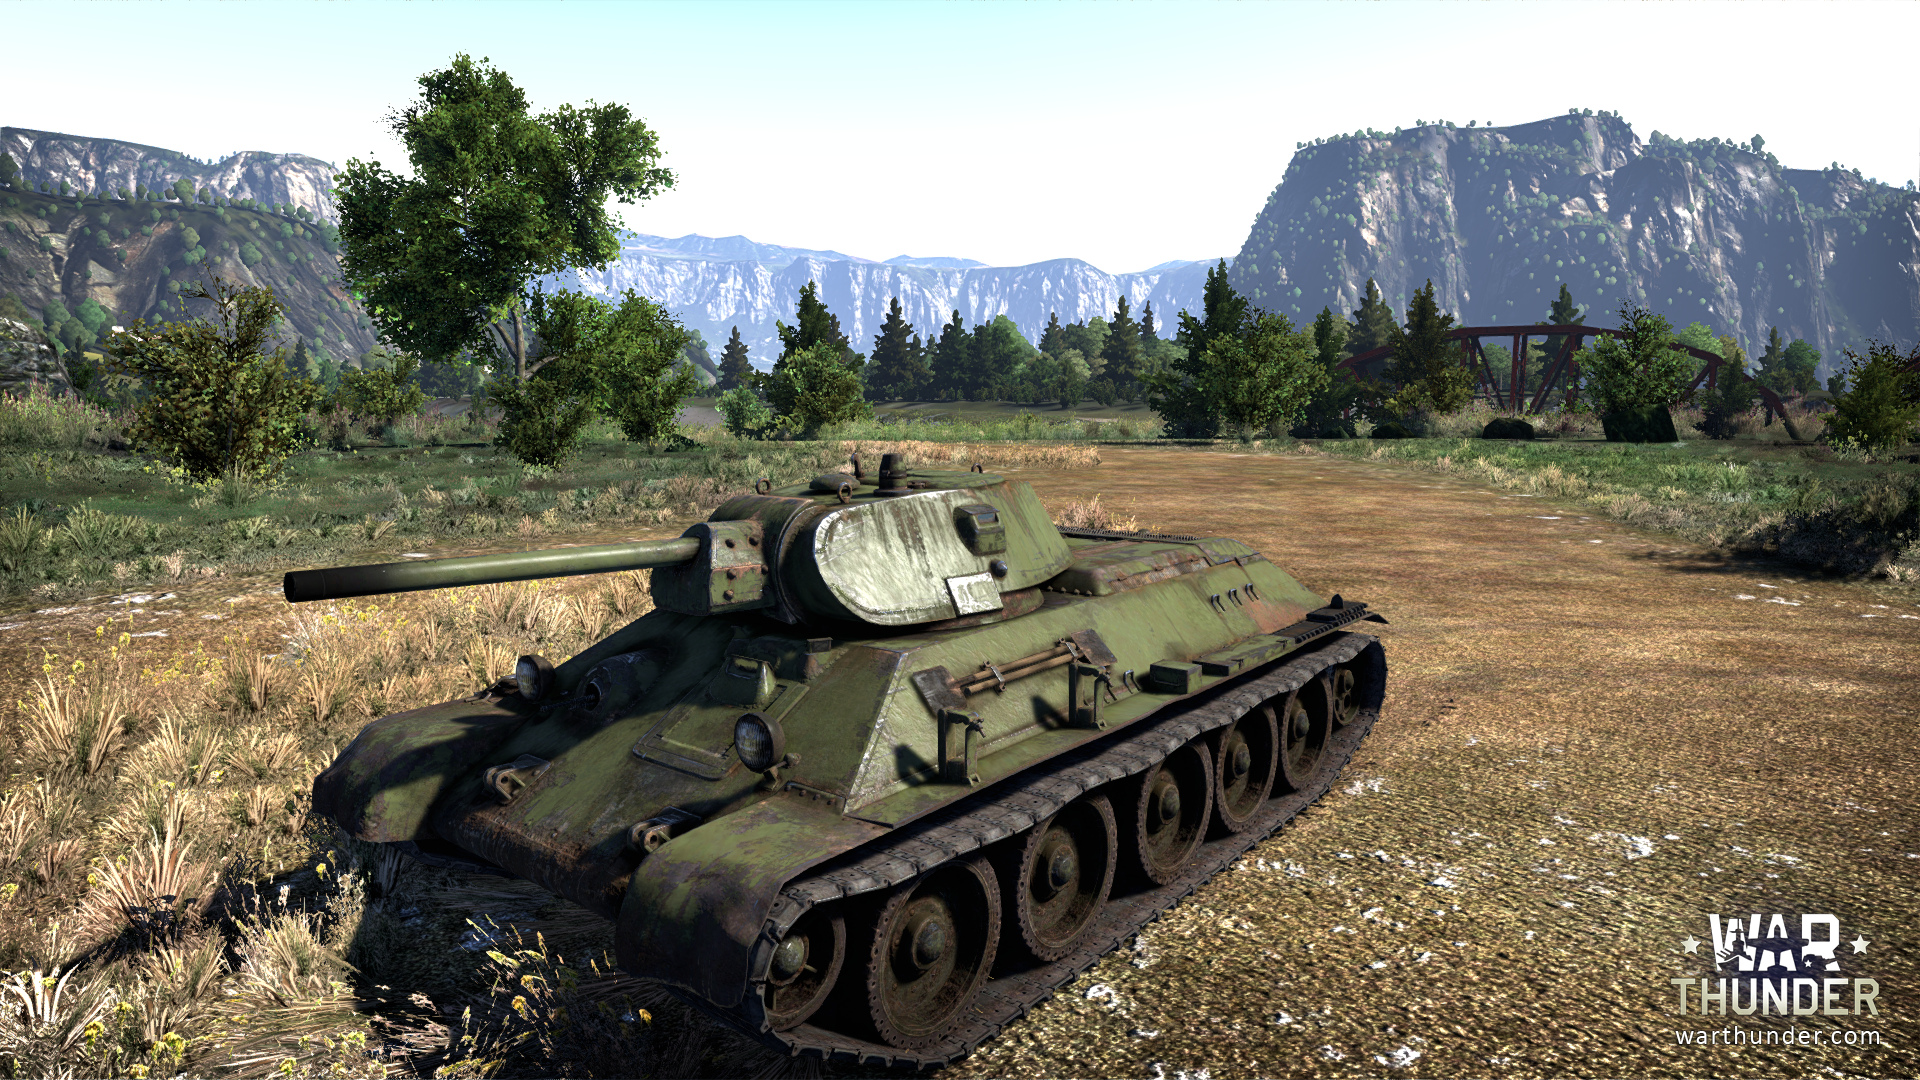 American ground forces war thunder